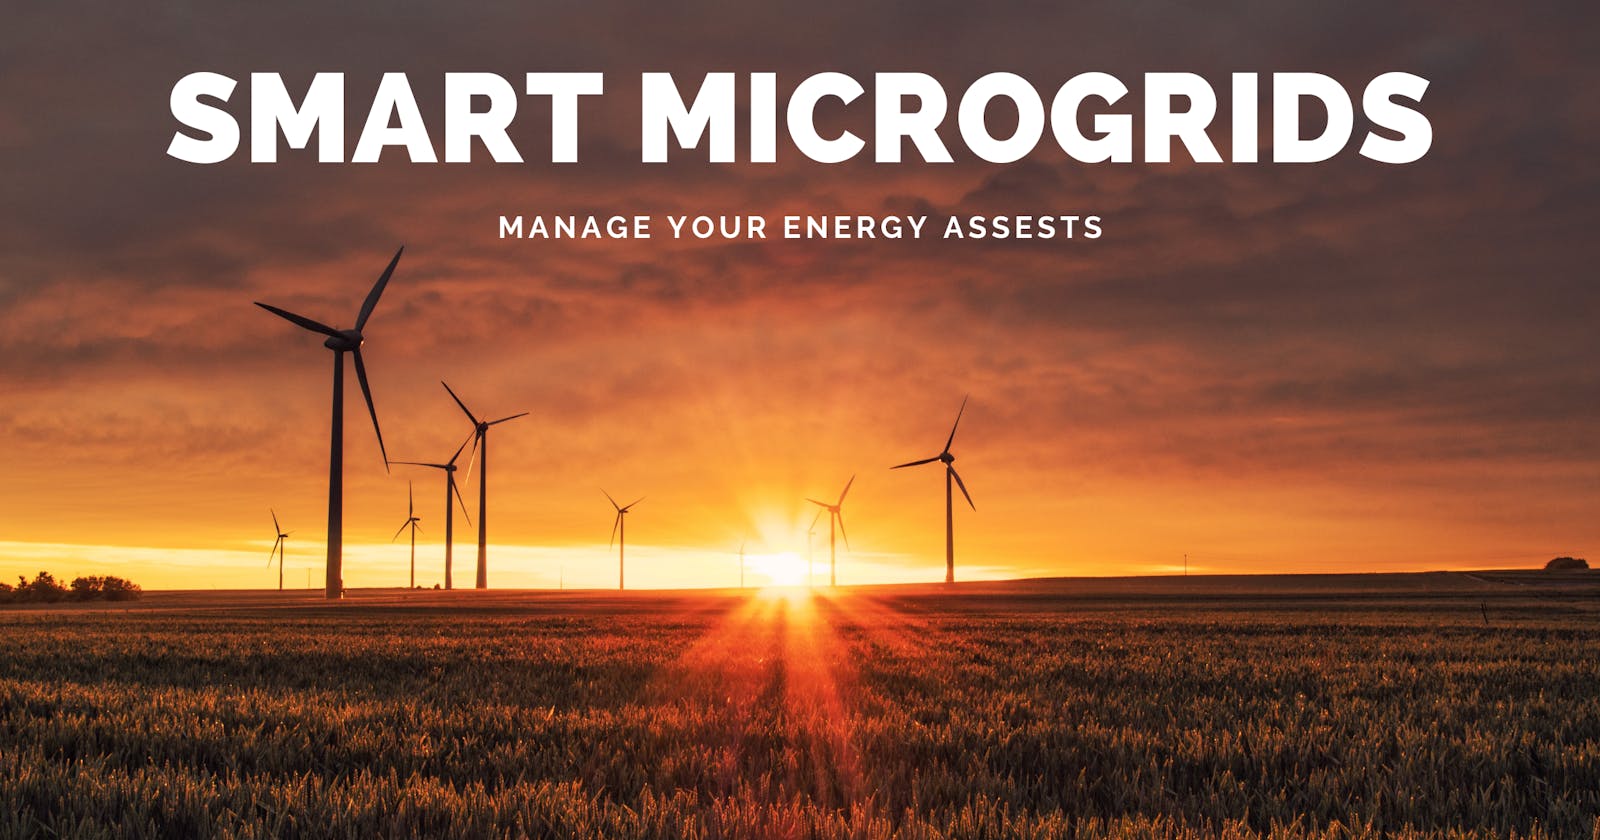 Smart Microgrids: Manage Your Energy Assets